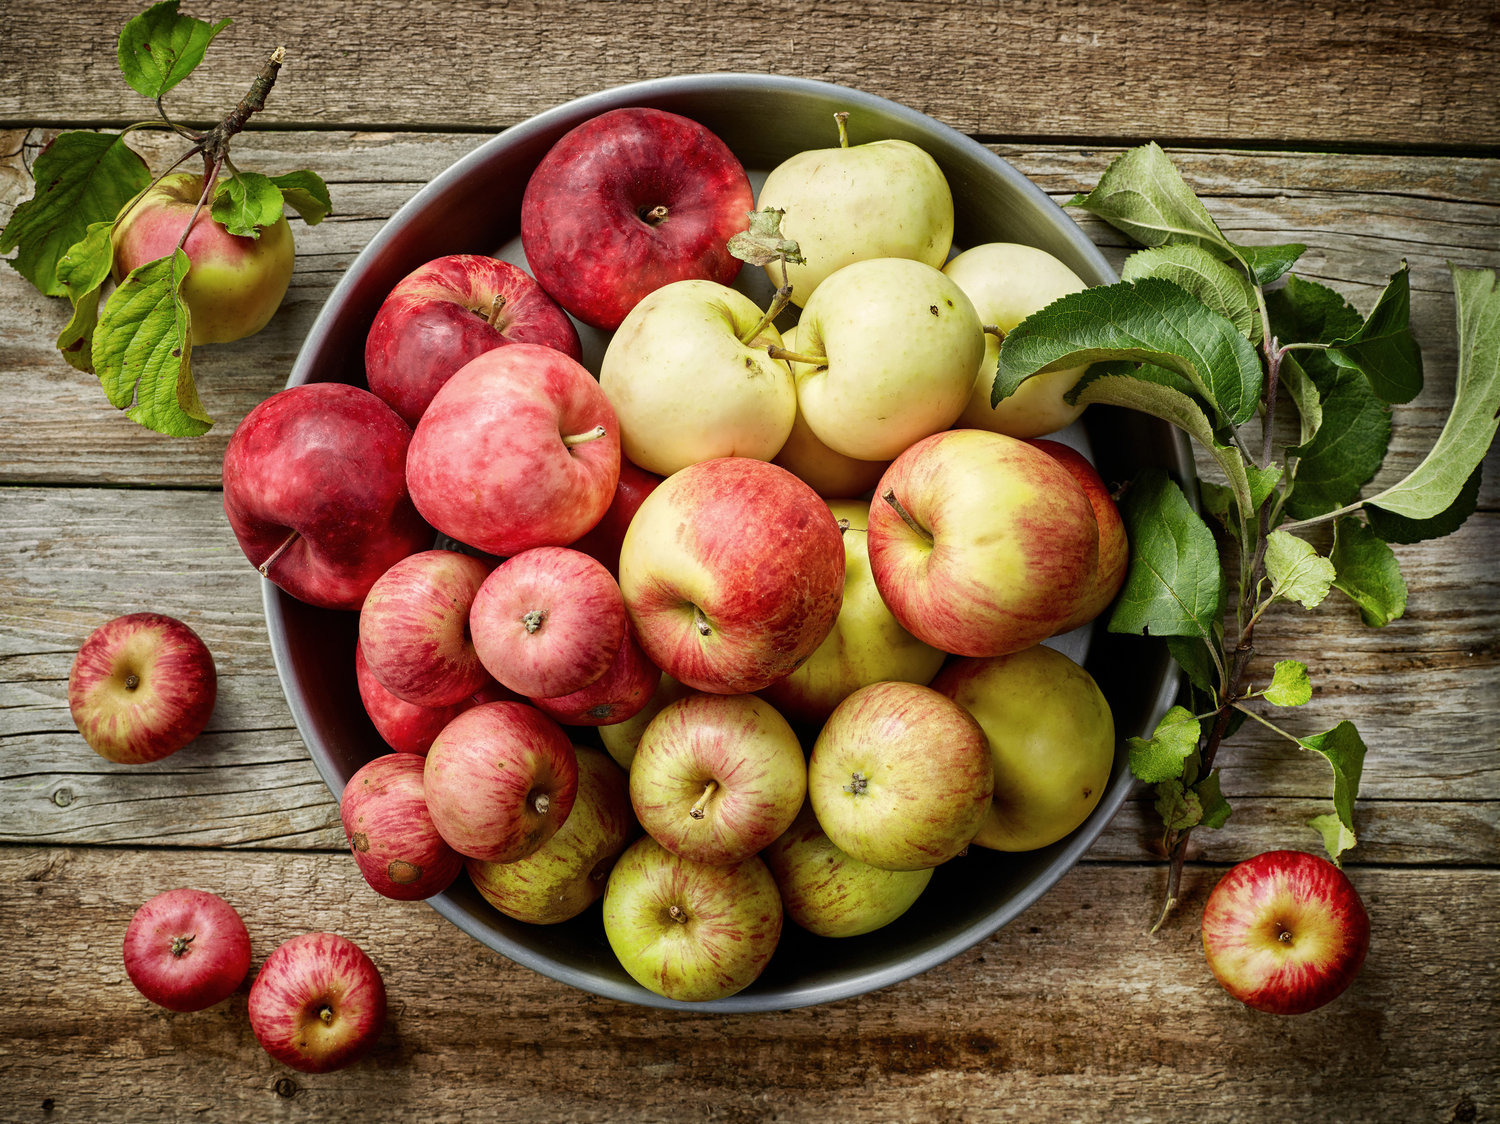 From straight to the table or a detour into the dehydrator or slow cooker, apples can fill out your favorite menu and your favorite memories.